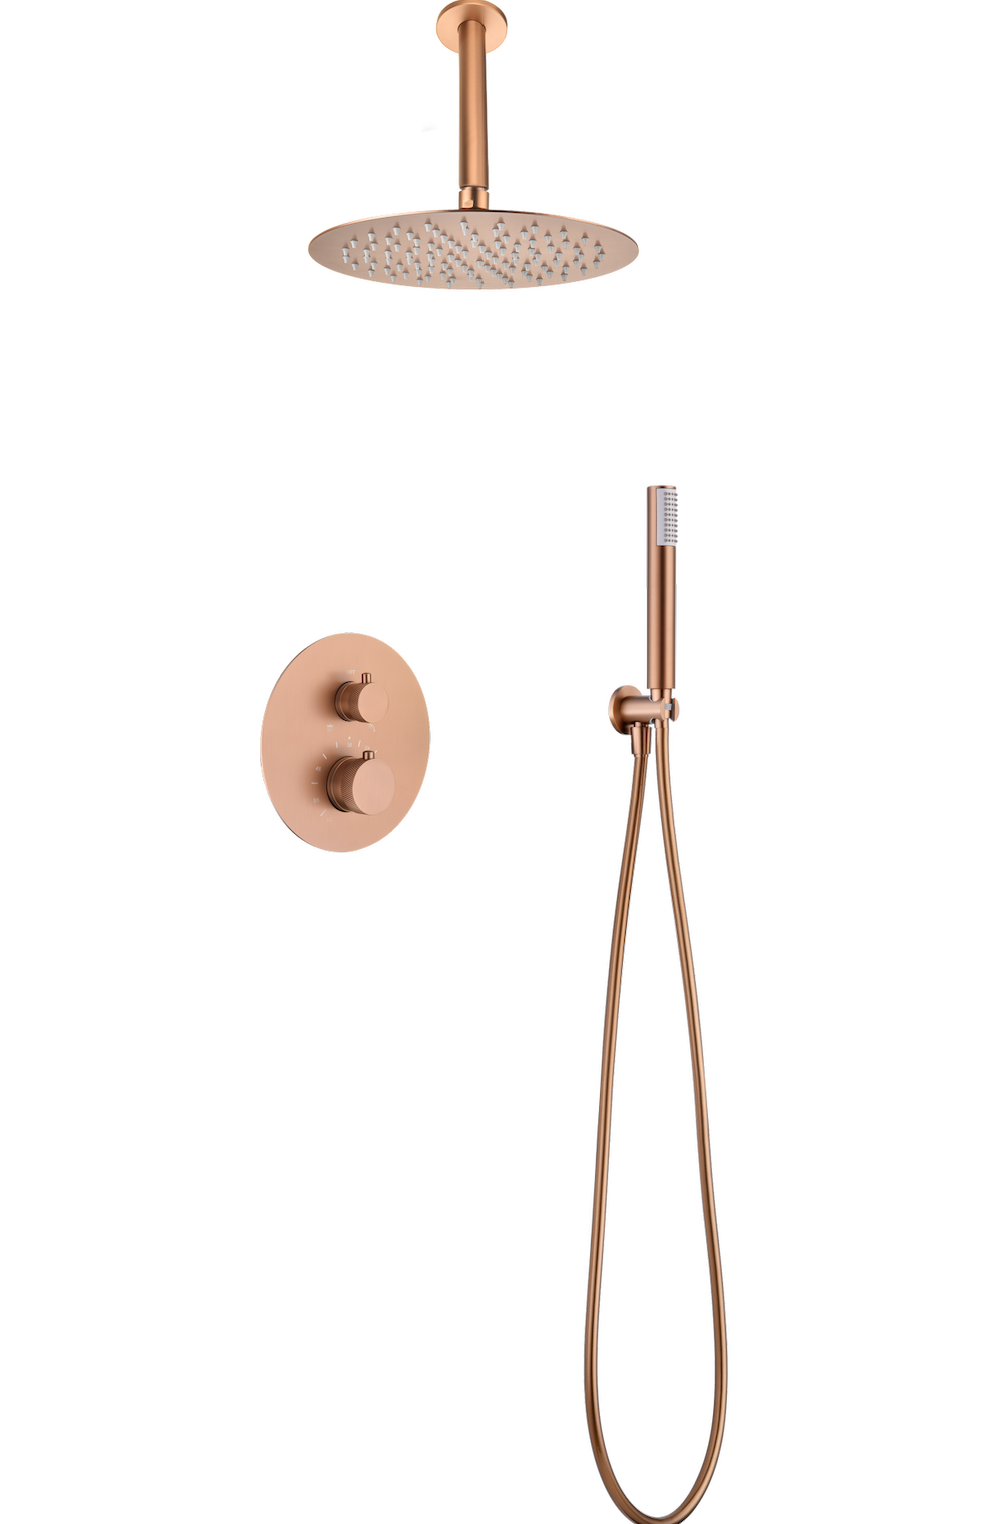 Imex Top brushed rose gold built-in thermostatic shower set 